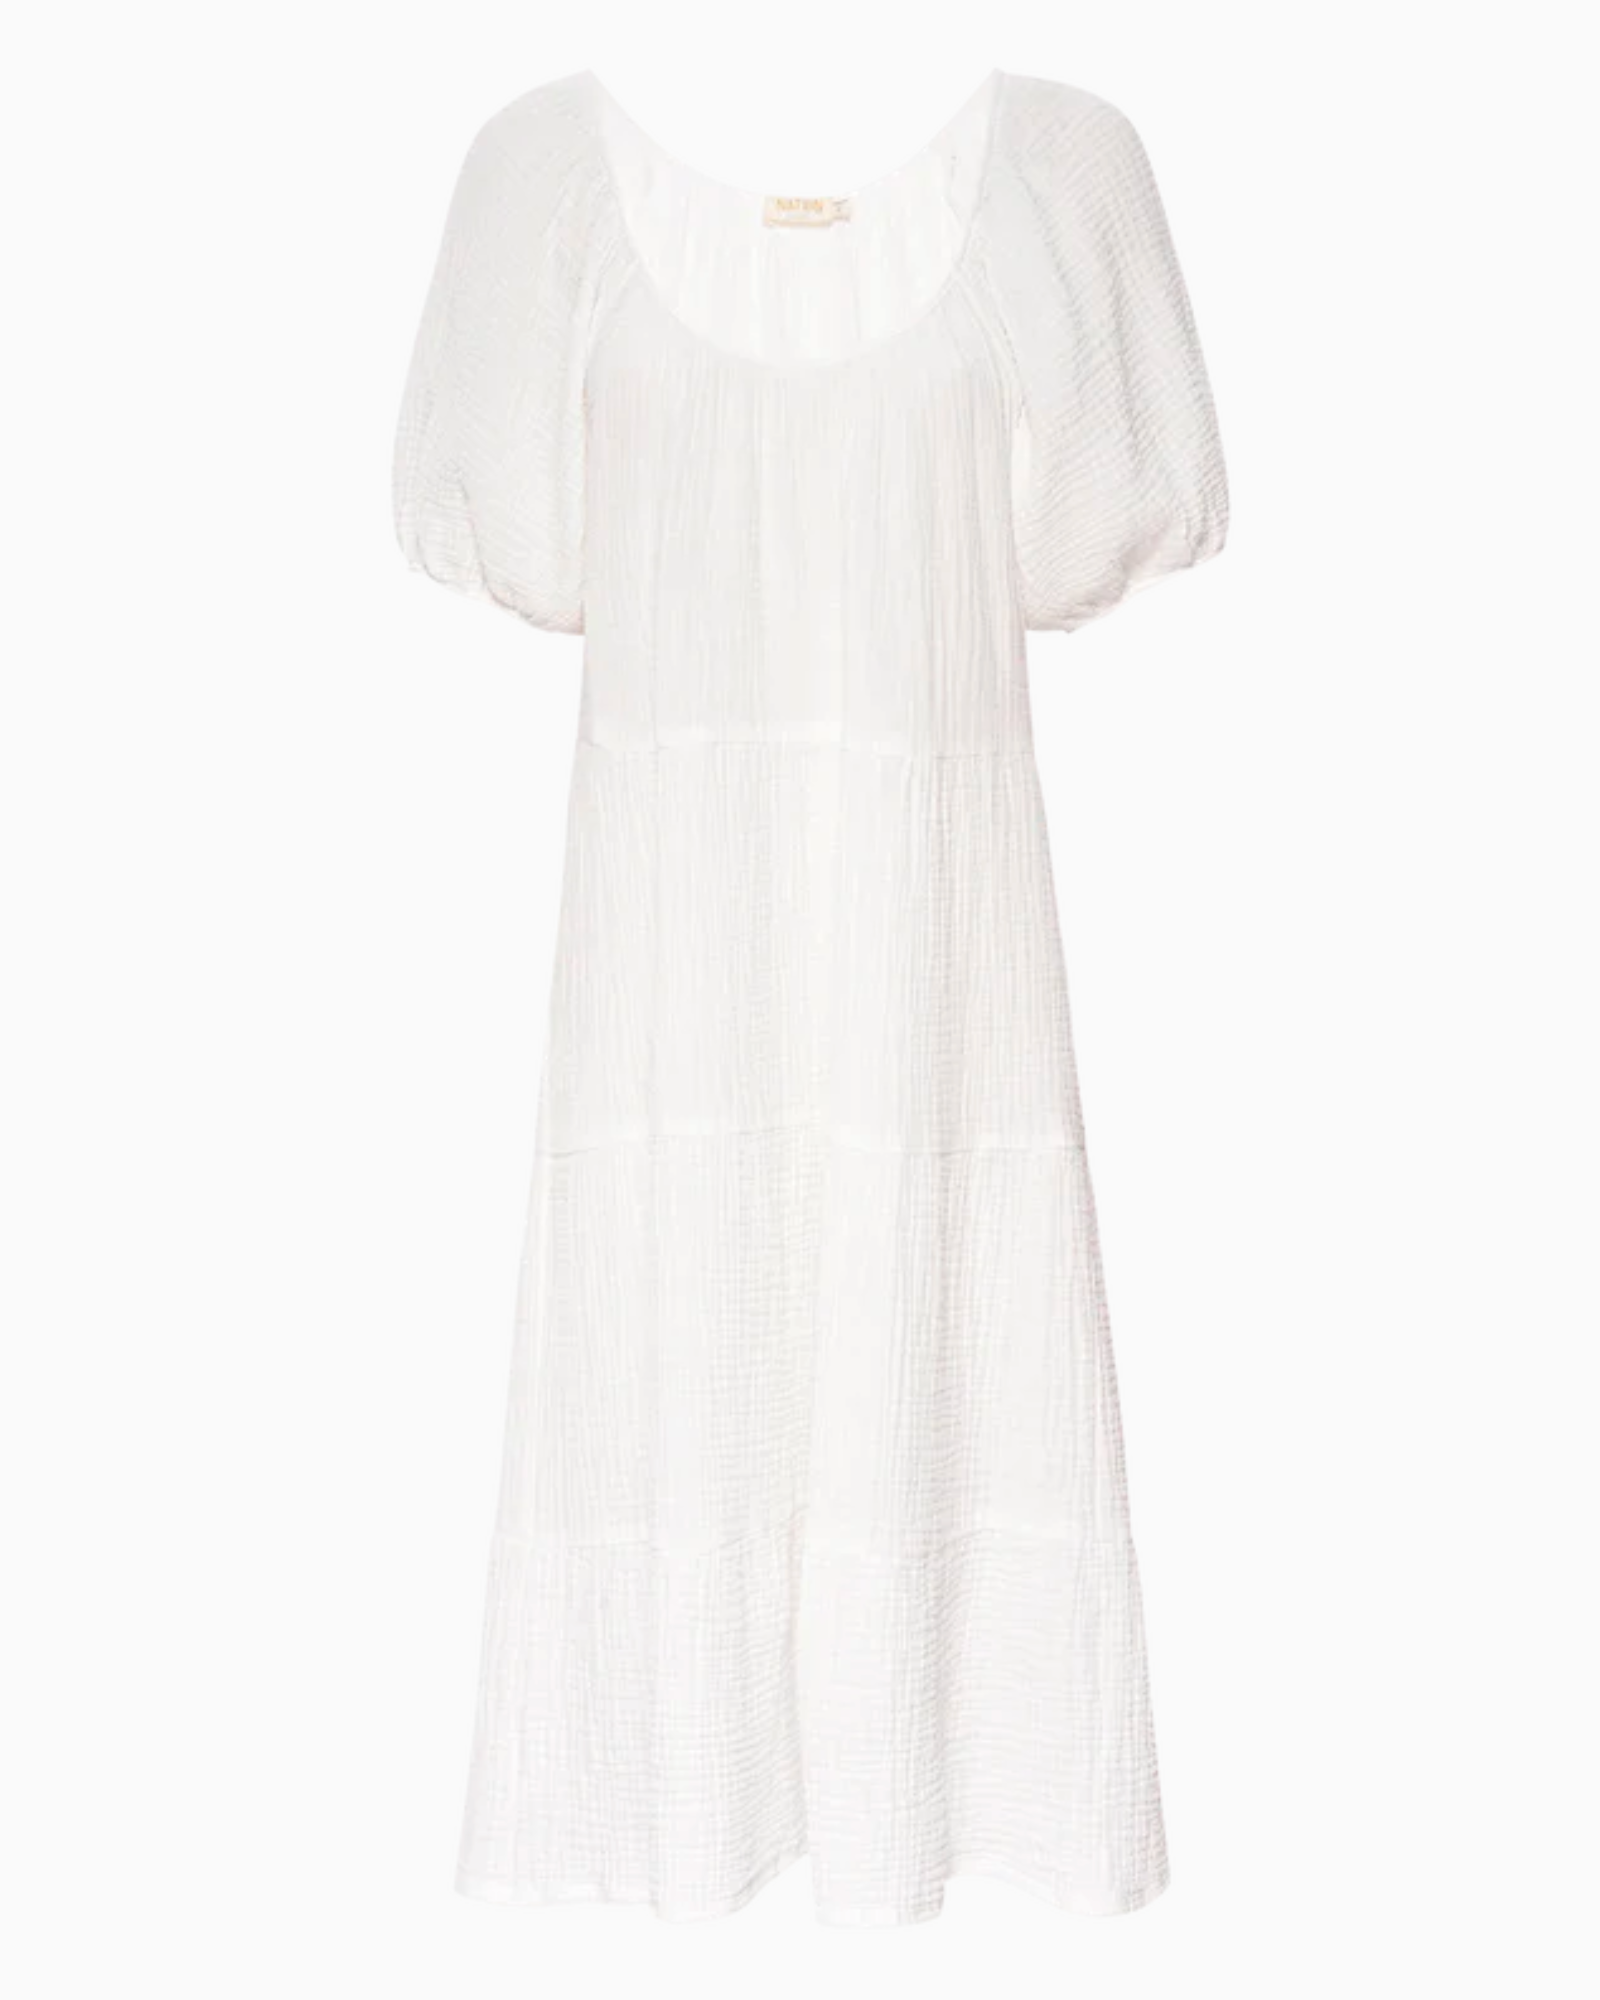 Nation Mindy Peasant Dress in White